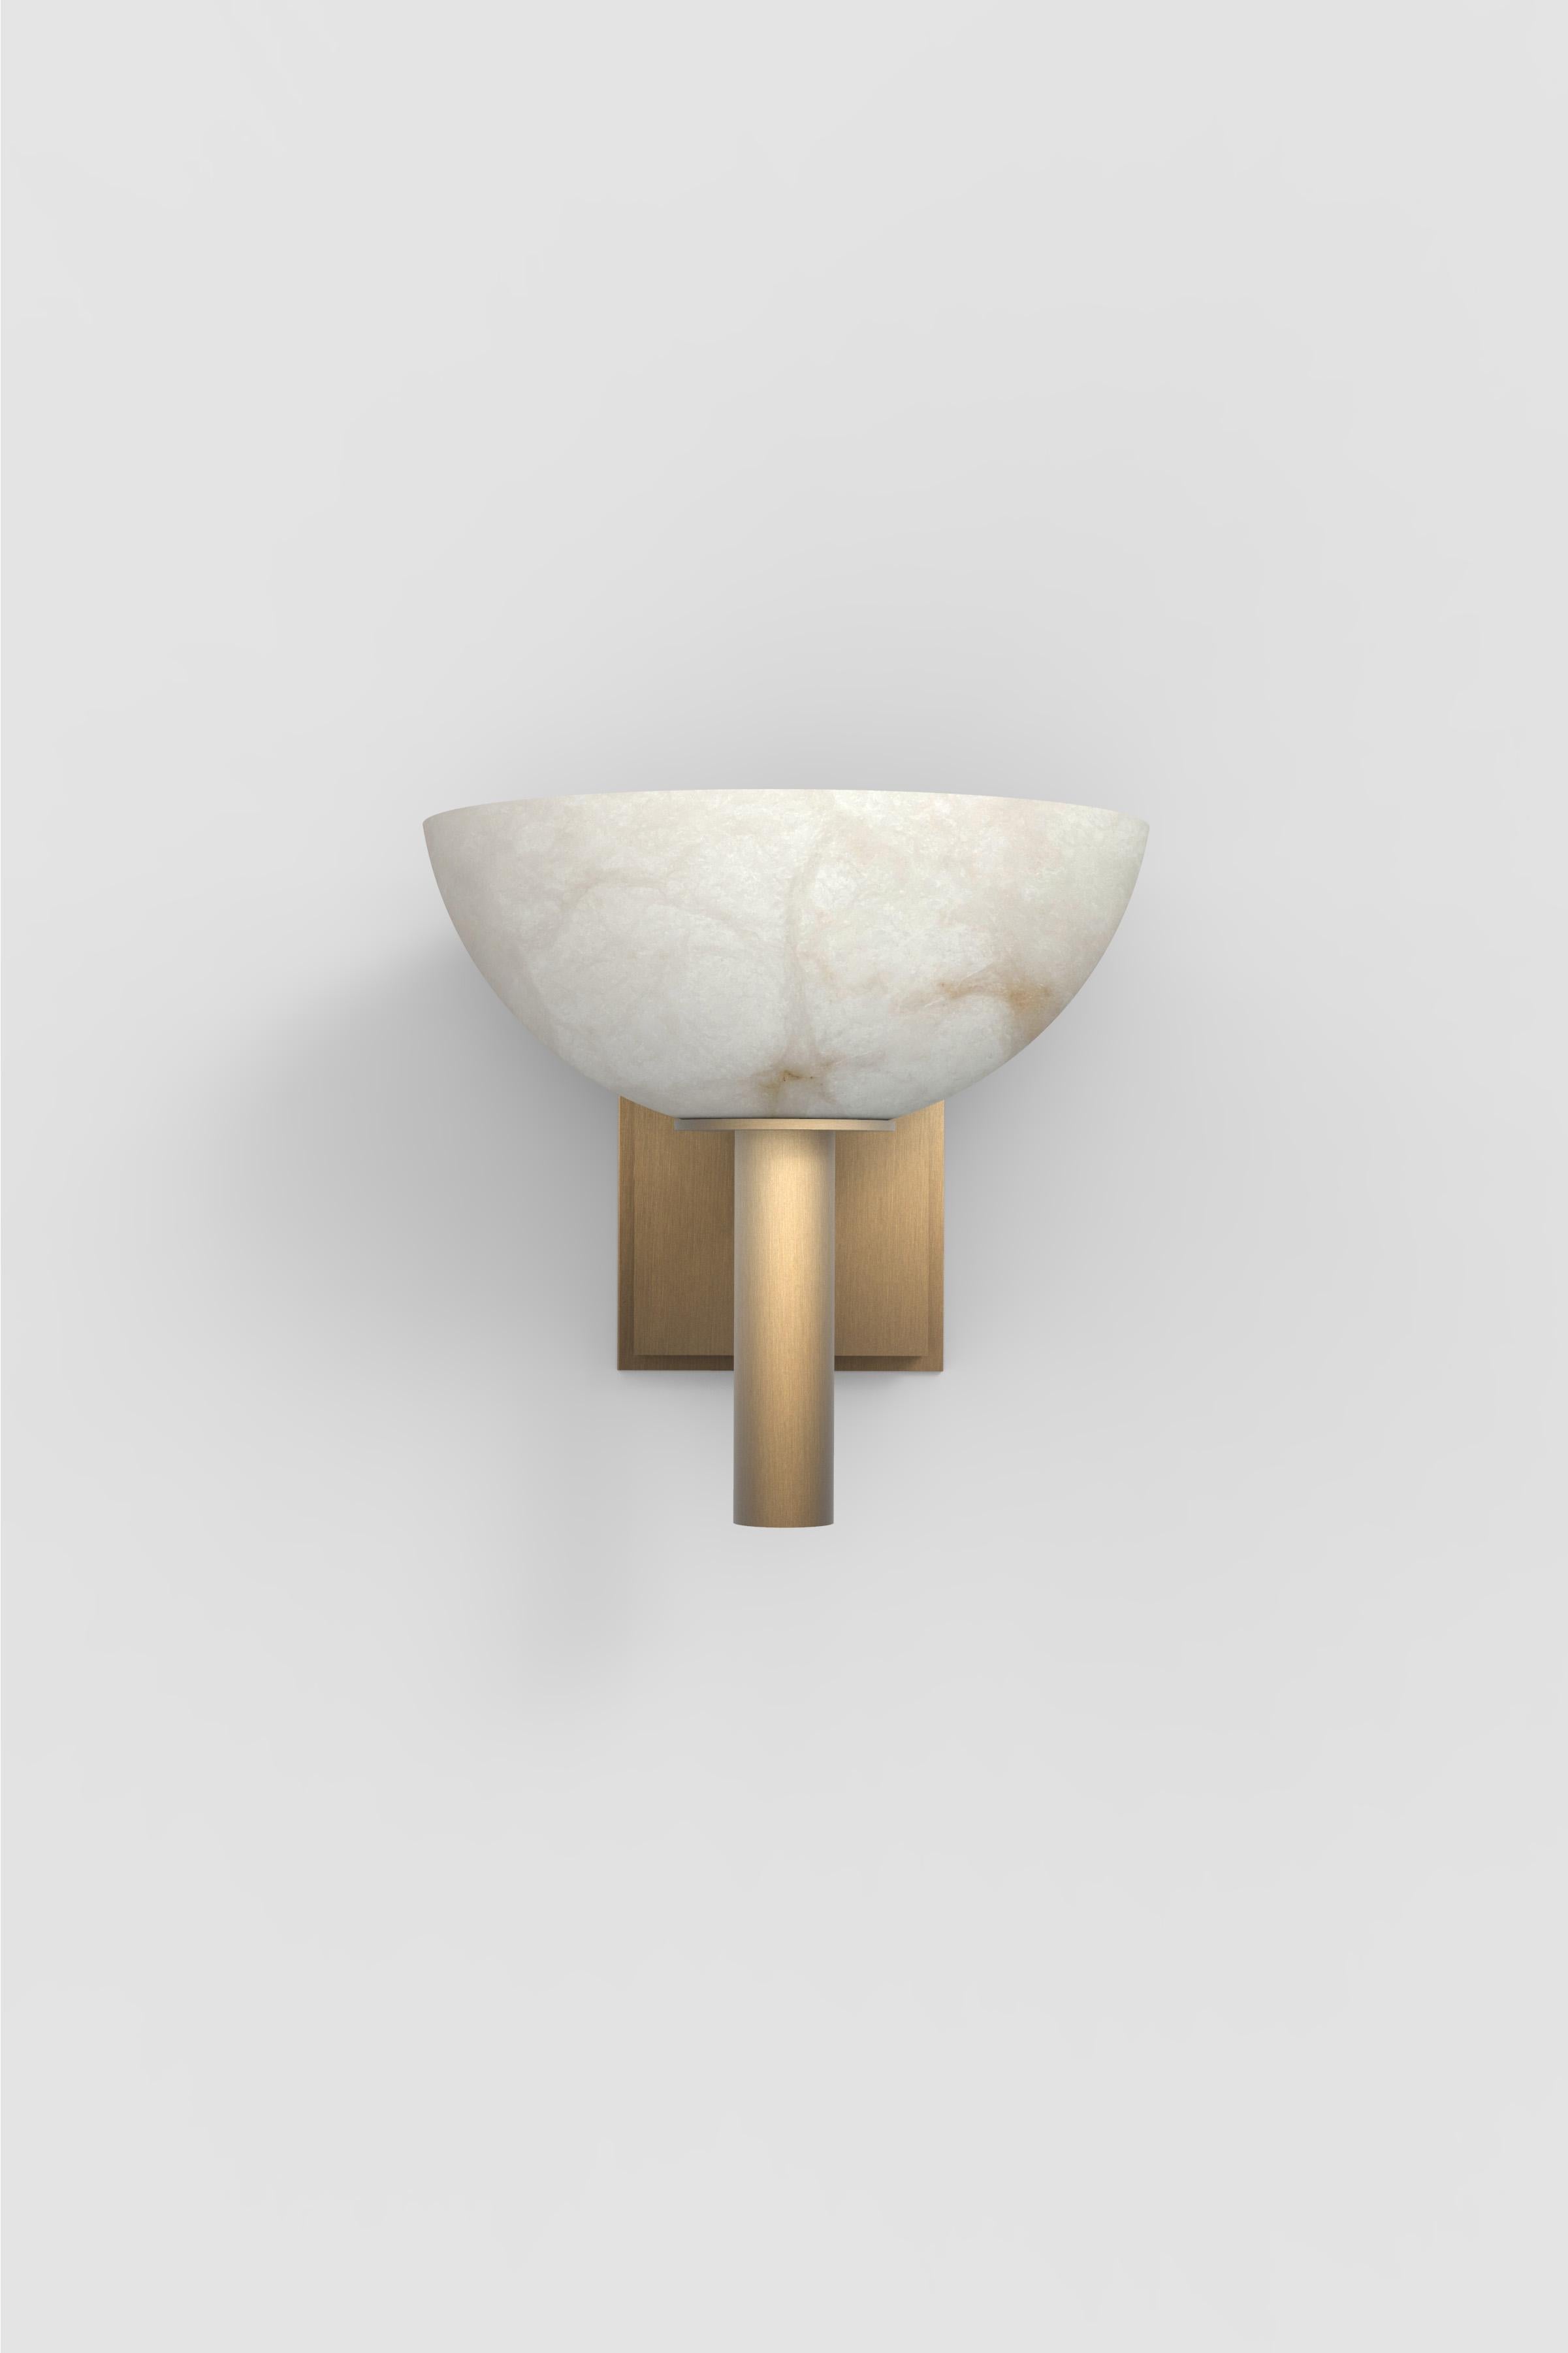 Post-Modern Contemporary Prato Sconce 200A in Alabaster by Orphan Work For Sale